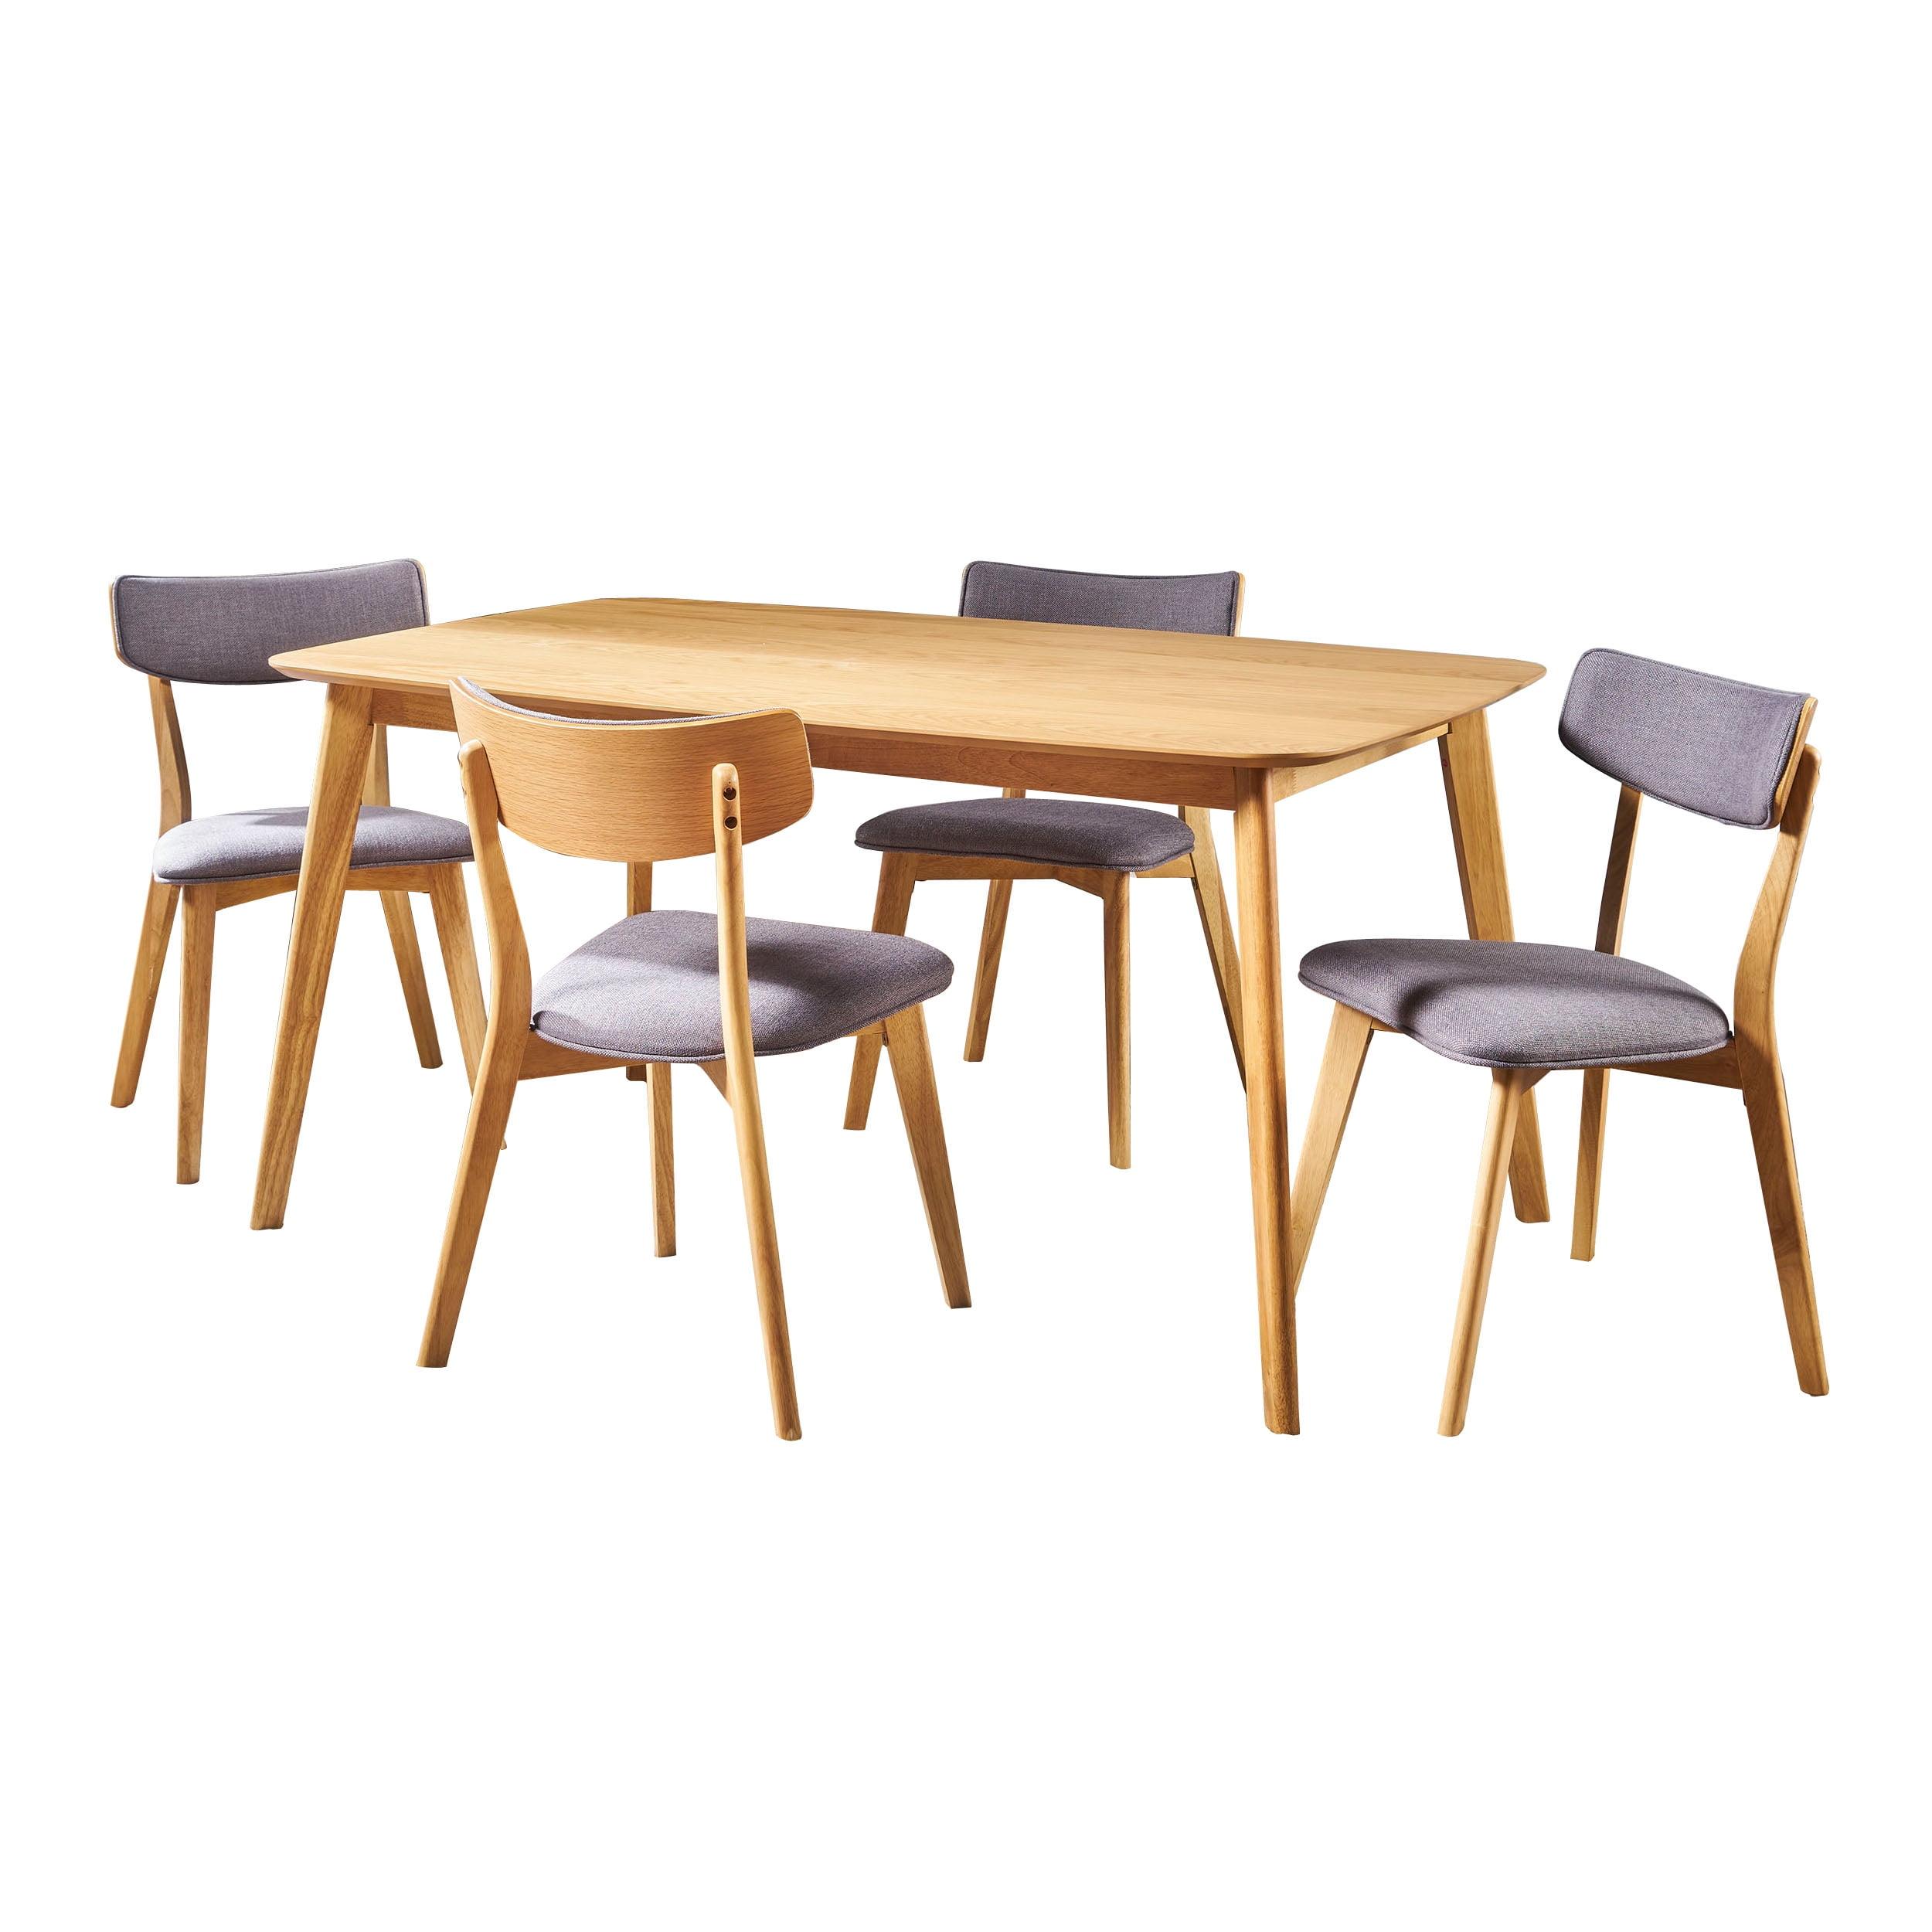 Aman Mid-Century 5-Piece Dining Set in Natural Oak with Dark Grey Fabric Chairs